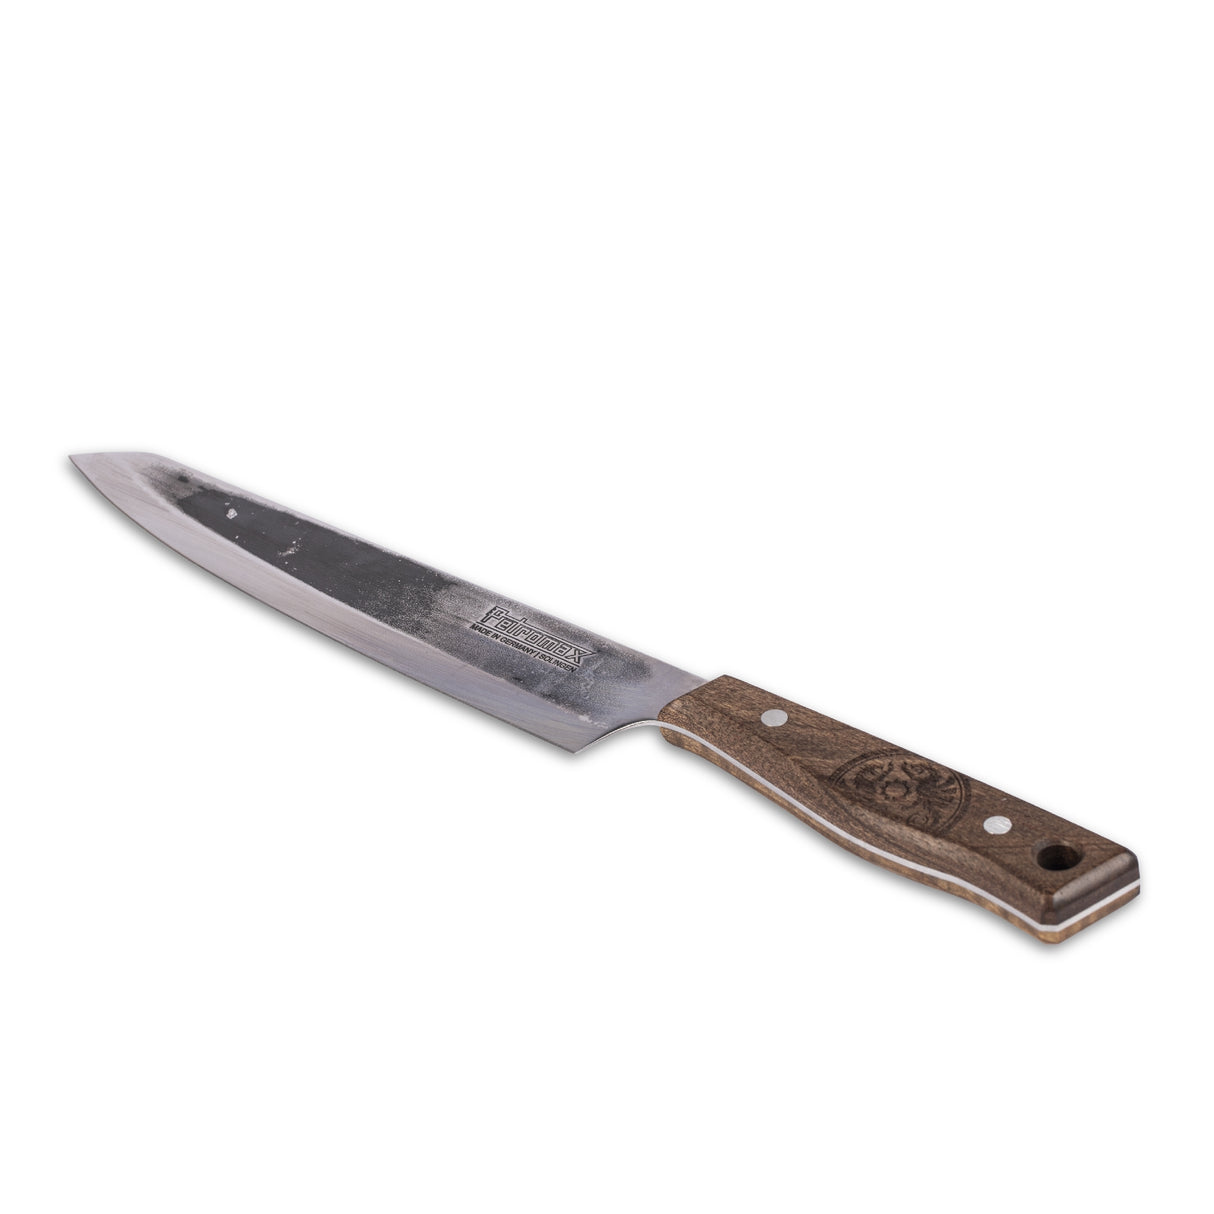 Cooking knife 20 cm